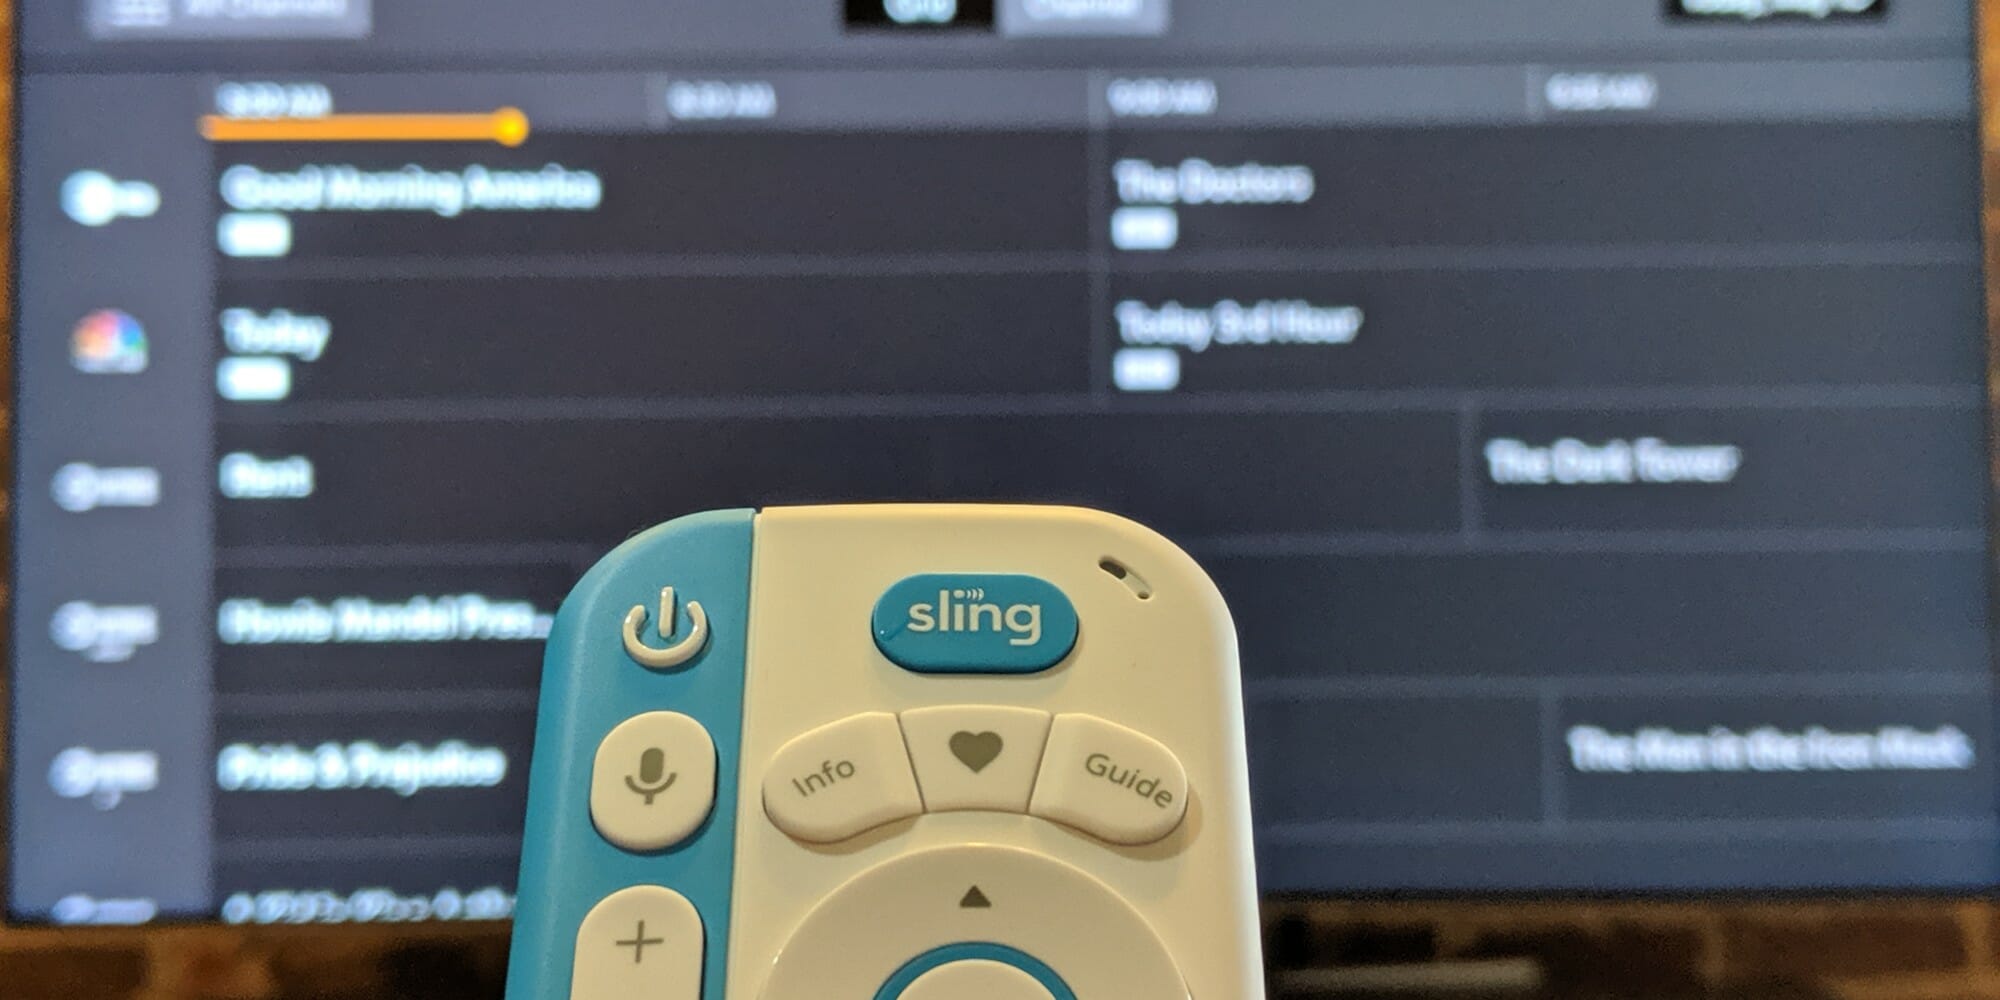 sling tv packages 2020 prices